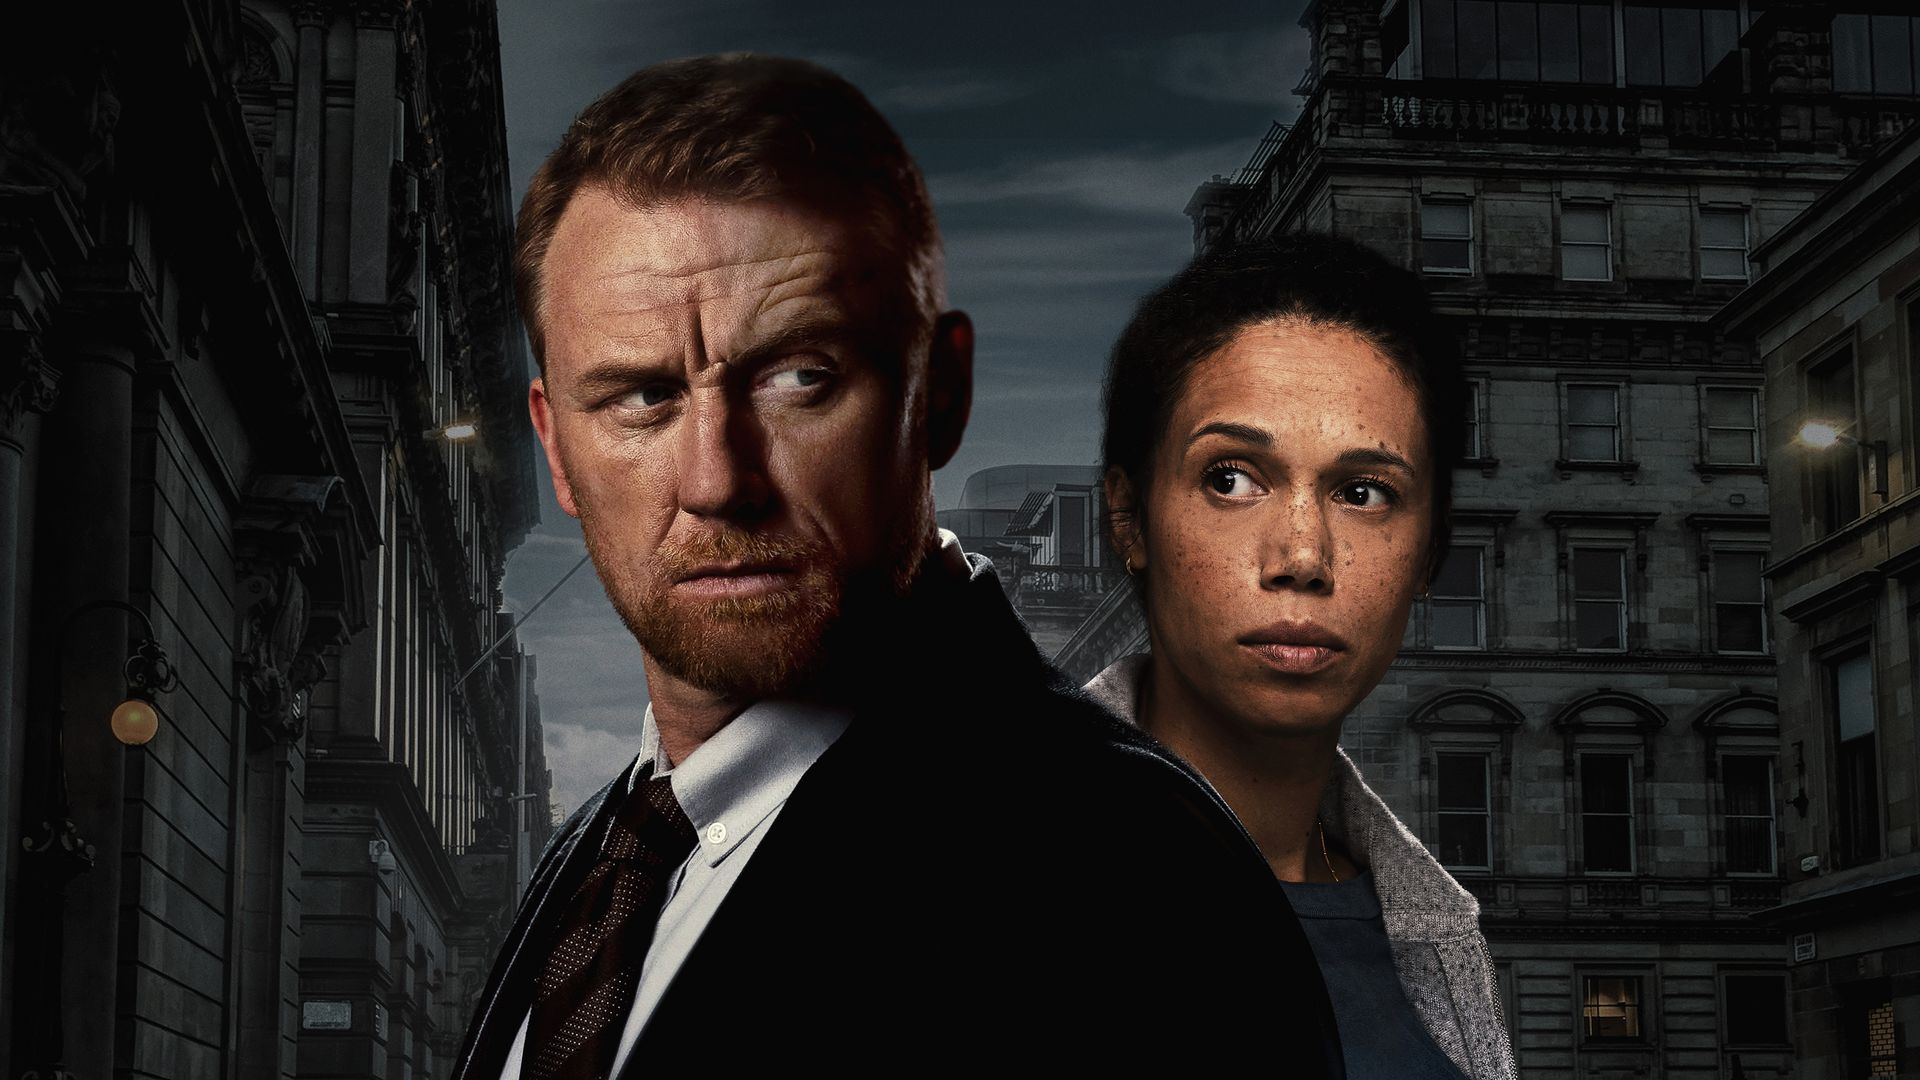 Kevin McKidd as Chris O'Neill and Vinette Robinson as Michelle O'Neill in Six Four